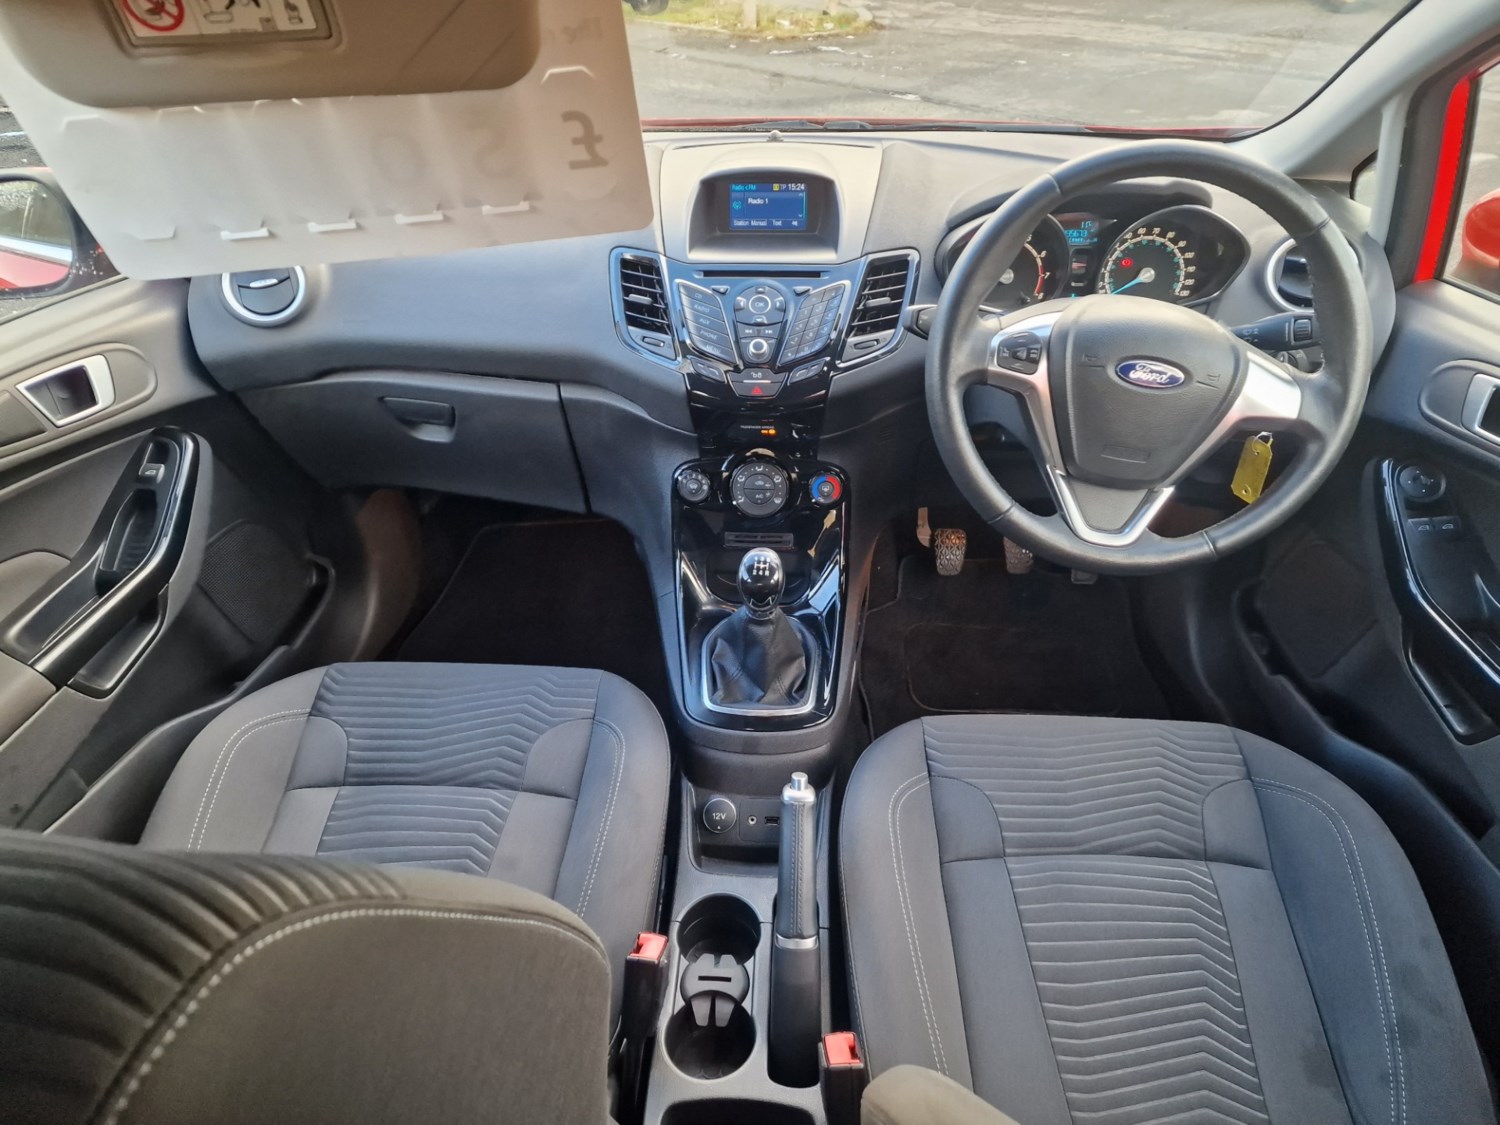 Ford Fiesta Listing Image